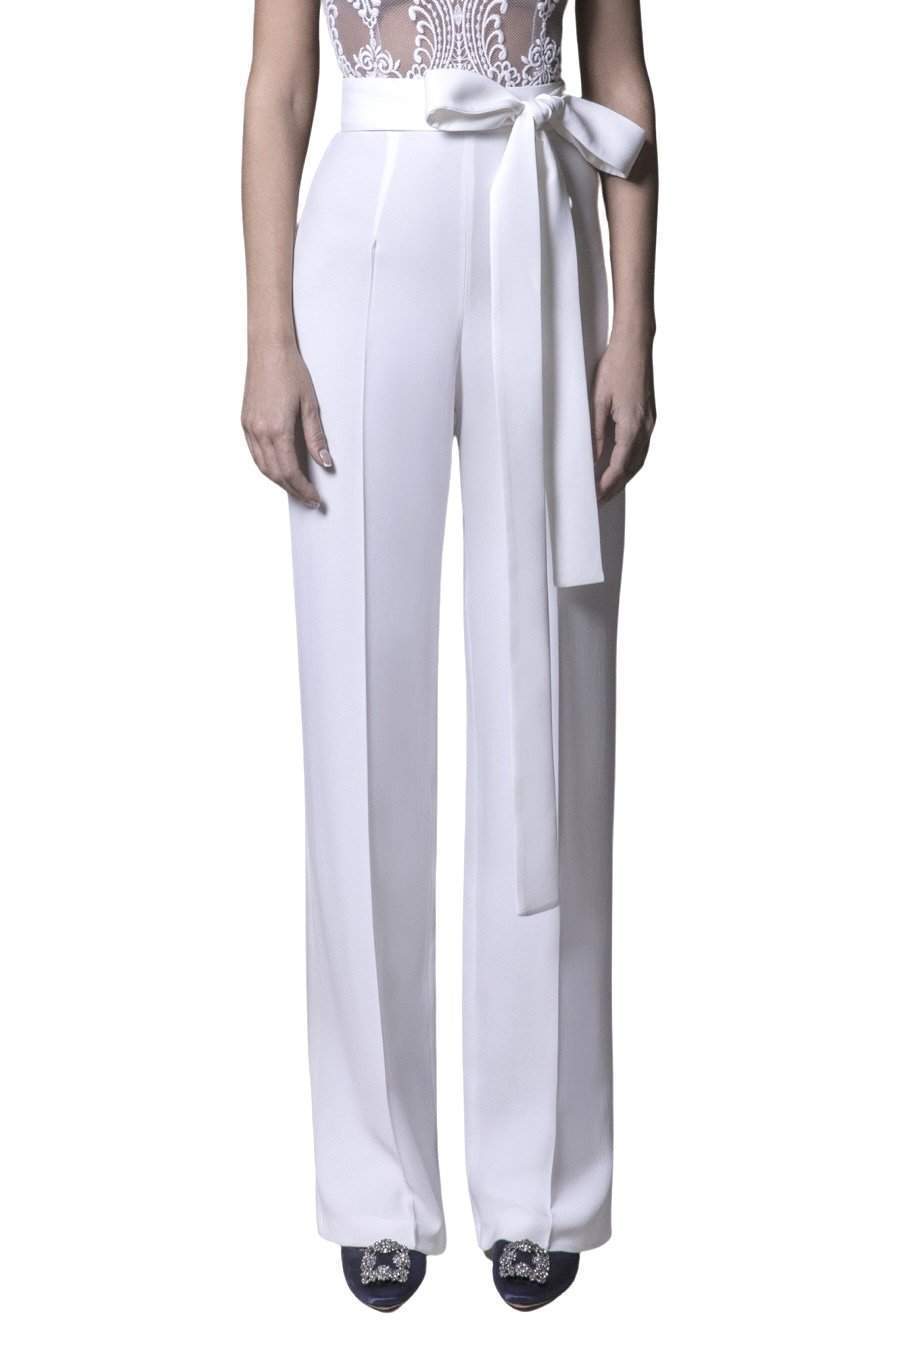 Crepe High Waist Trousers White-danddclothing-AFRICAN WEAR FOR WOMEN,Female trousers,Trousers,white